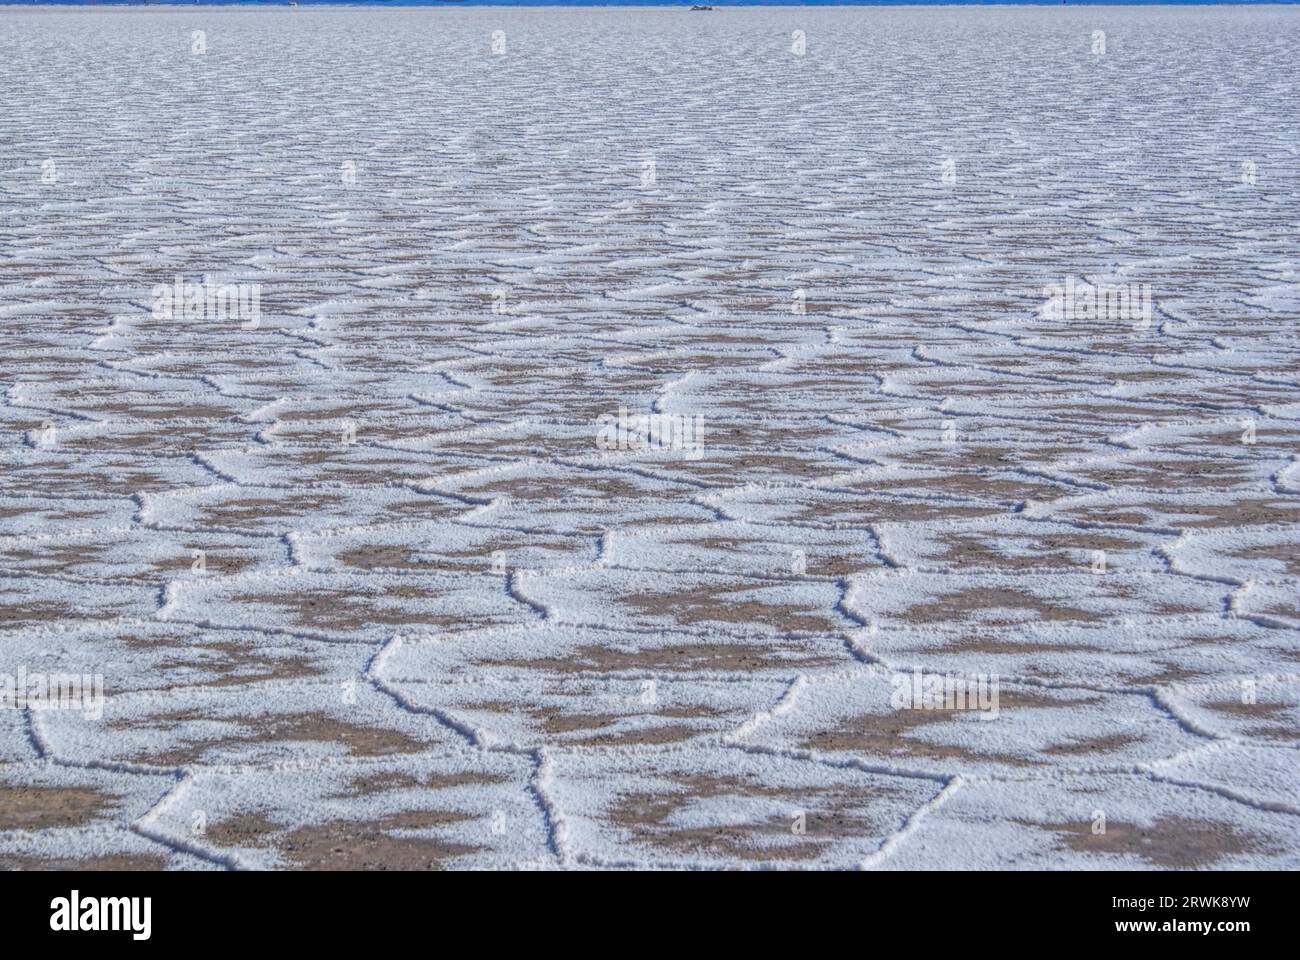 Unusual shapes on the surface of salt planes Salina Grandes in Argentina Stock Photo